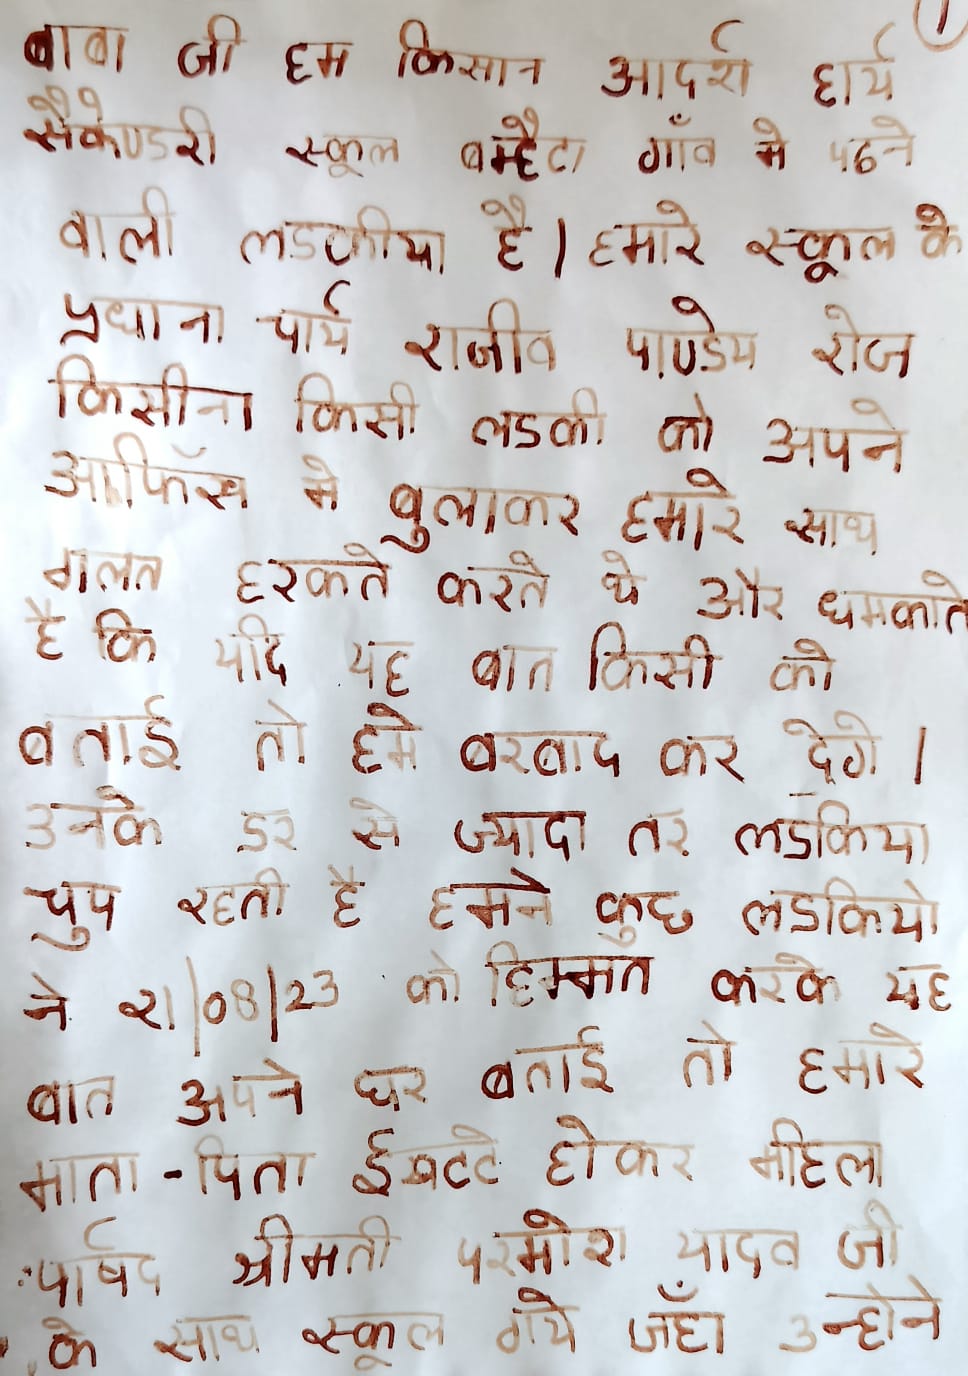 The girl students have sent a 4-page letter with blood to CM Yogi.